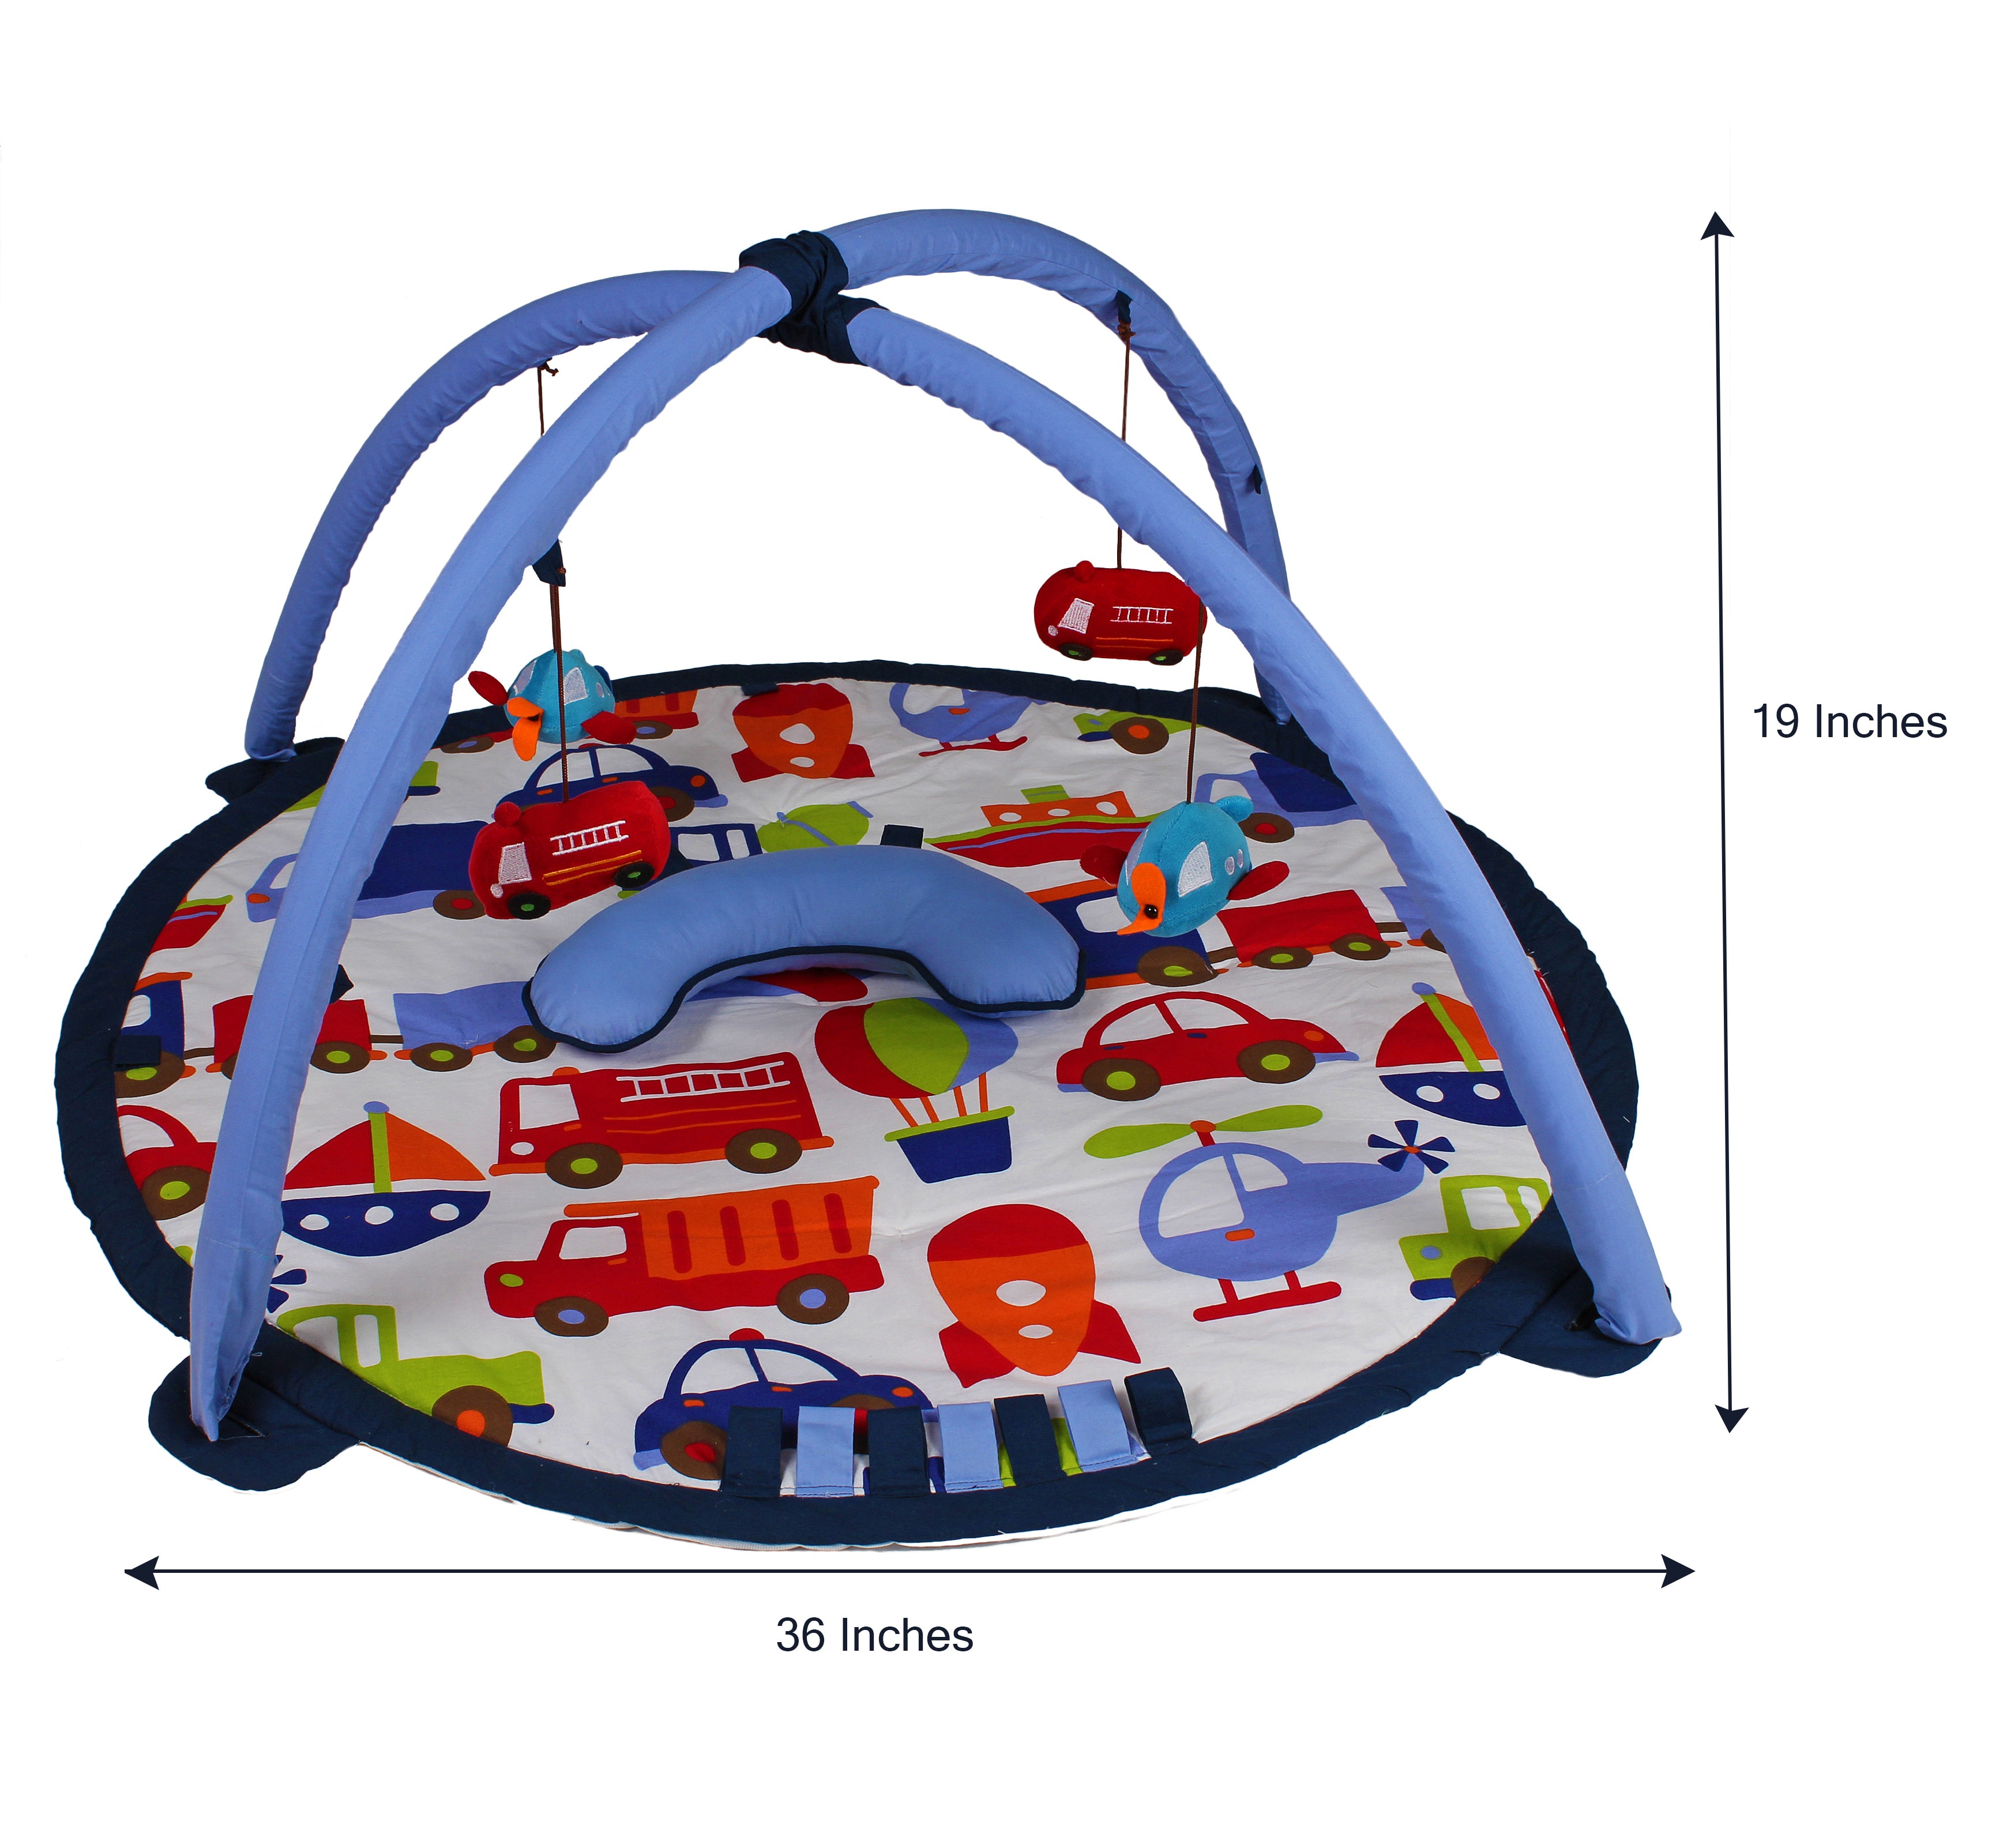 Bacati - Playmat/Baby Activity Gym with Mat, Transportation, Blue/Navy/Orange/Red/Green